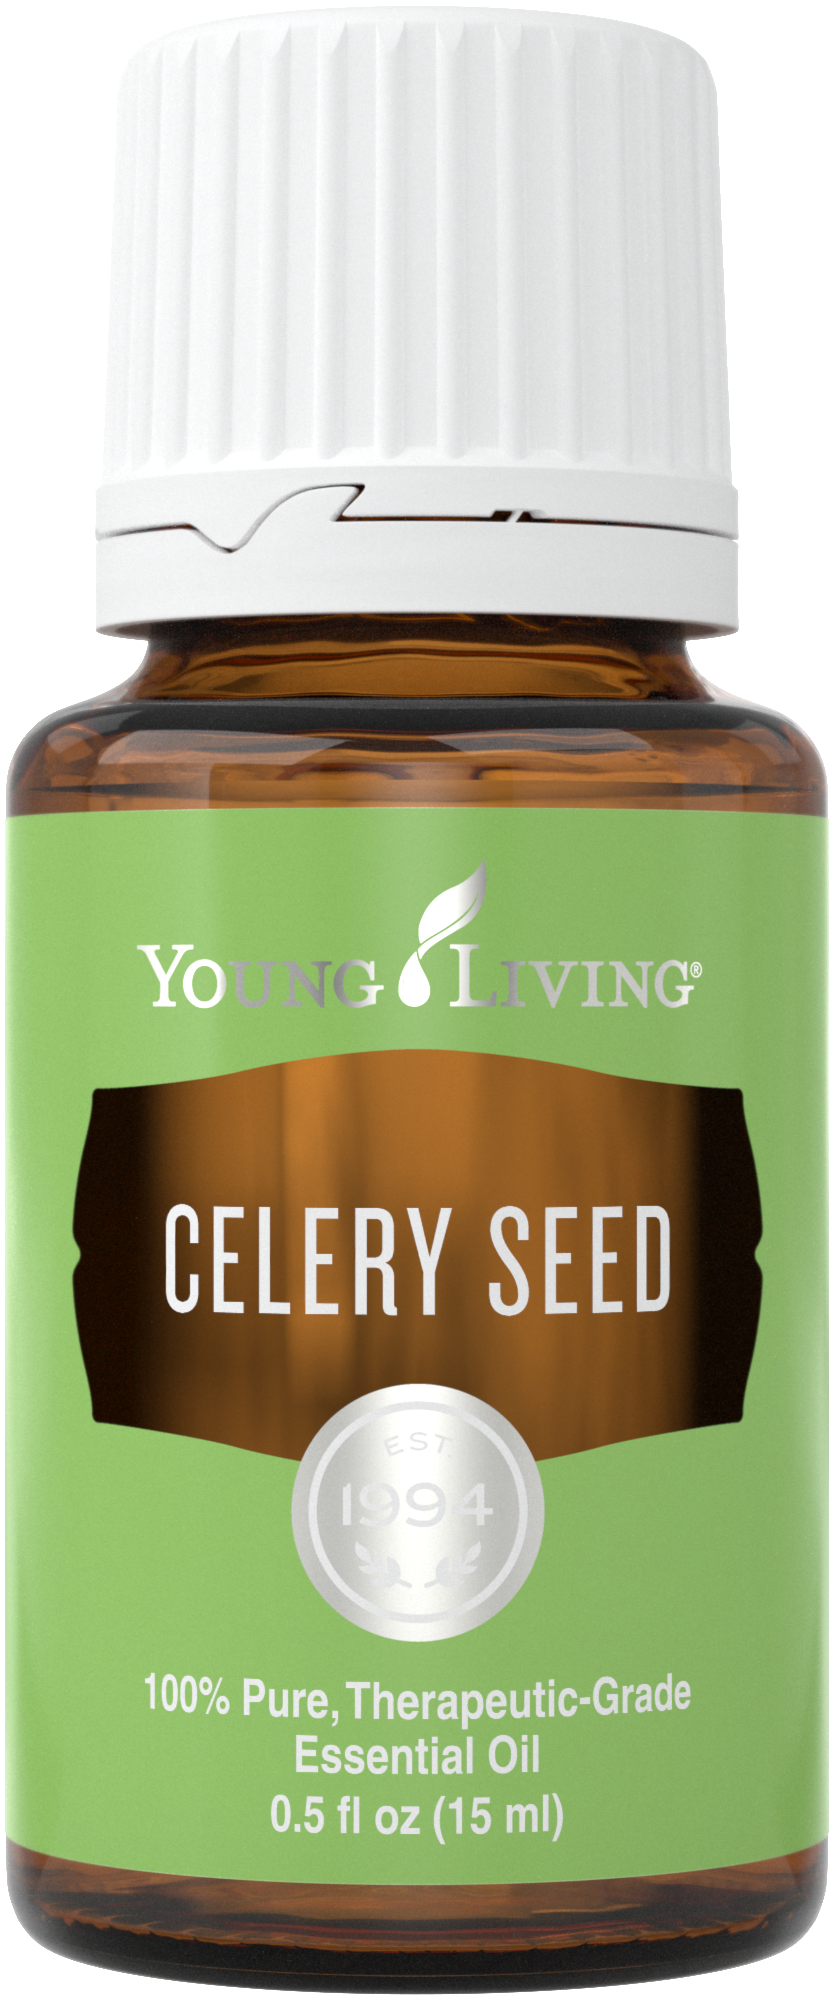 Celery Seed 15ml Silo.png